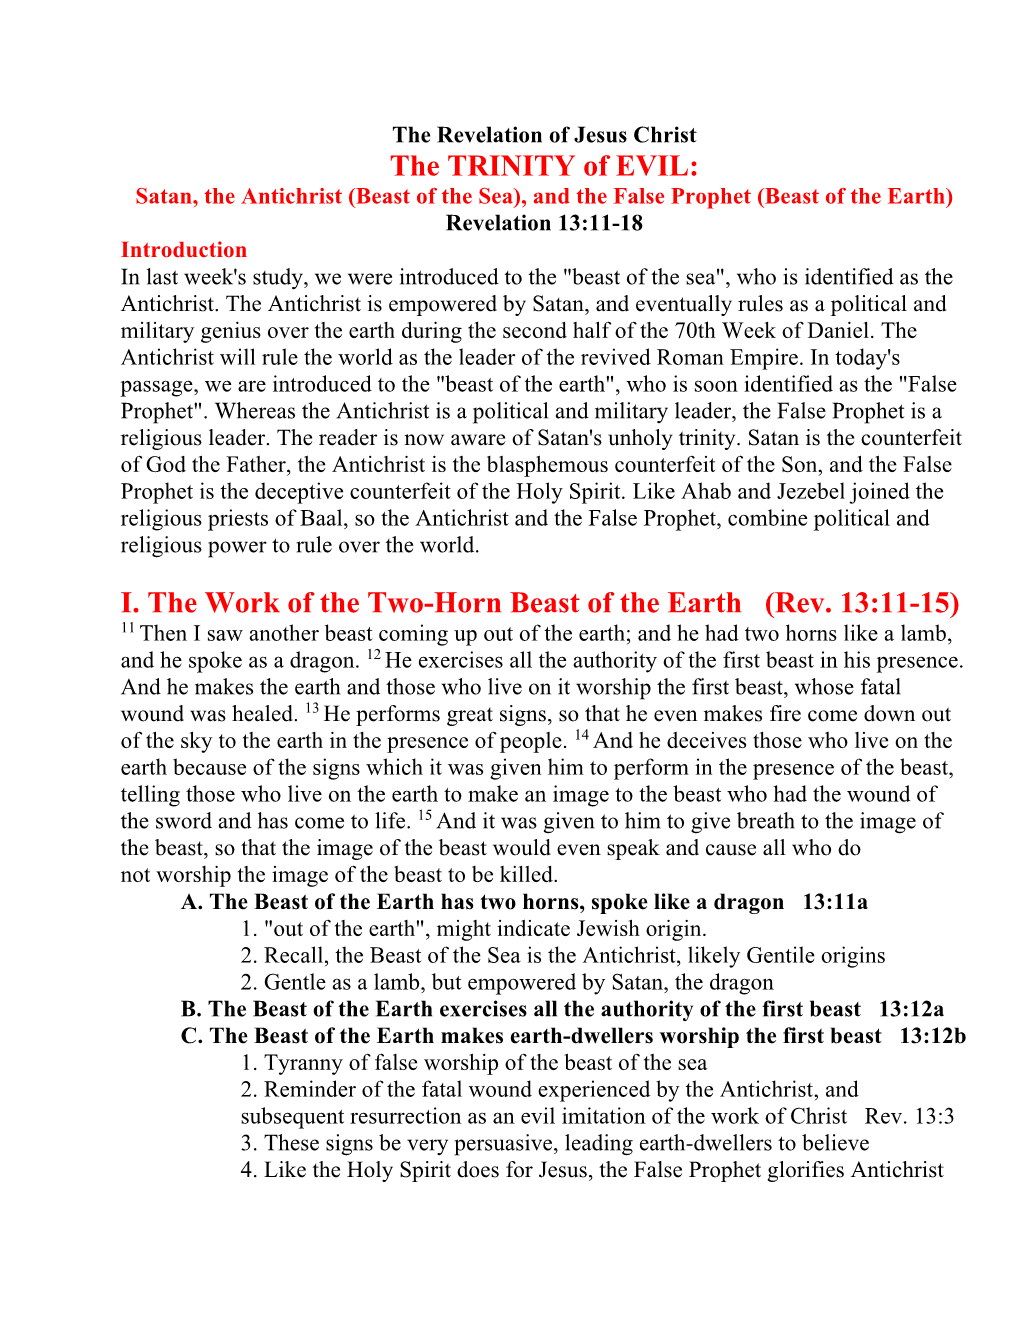 I. the Work of the Two-Horn Beast of the Earth (Rev. 13:11-15)